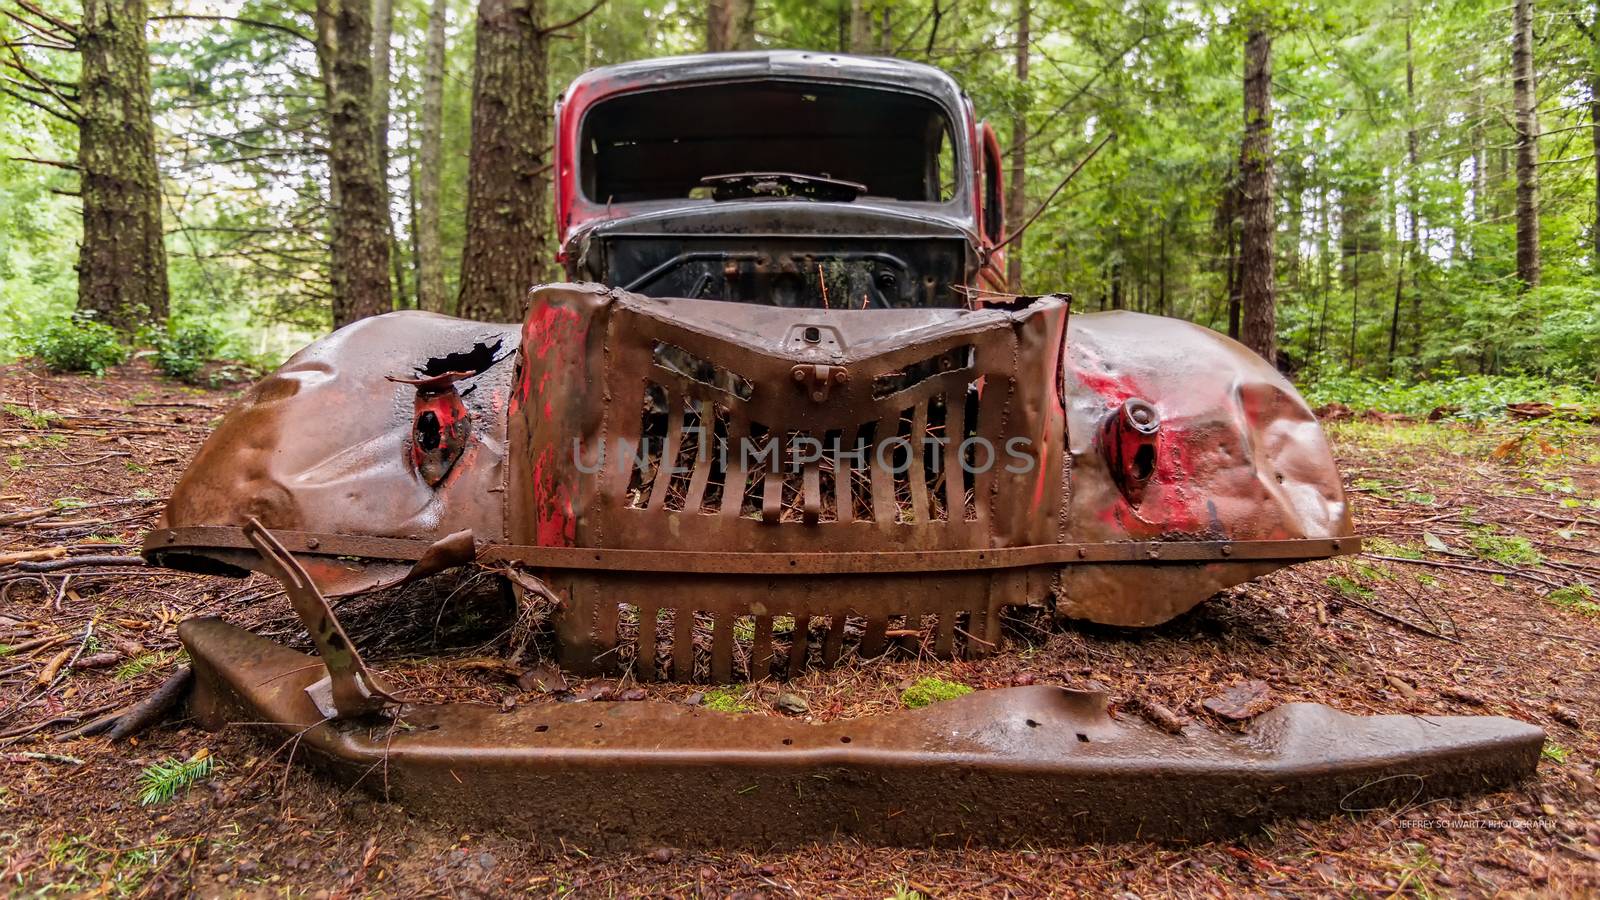 An abandoned antique vehicle rusts in a Northern California forest.